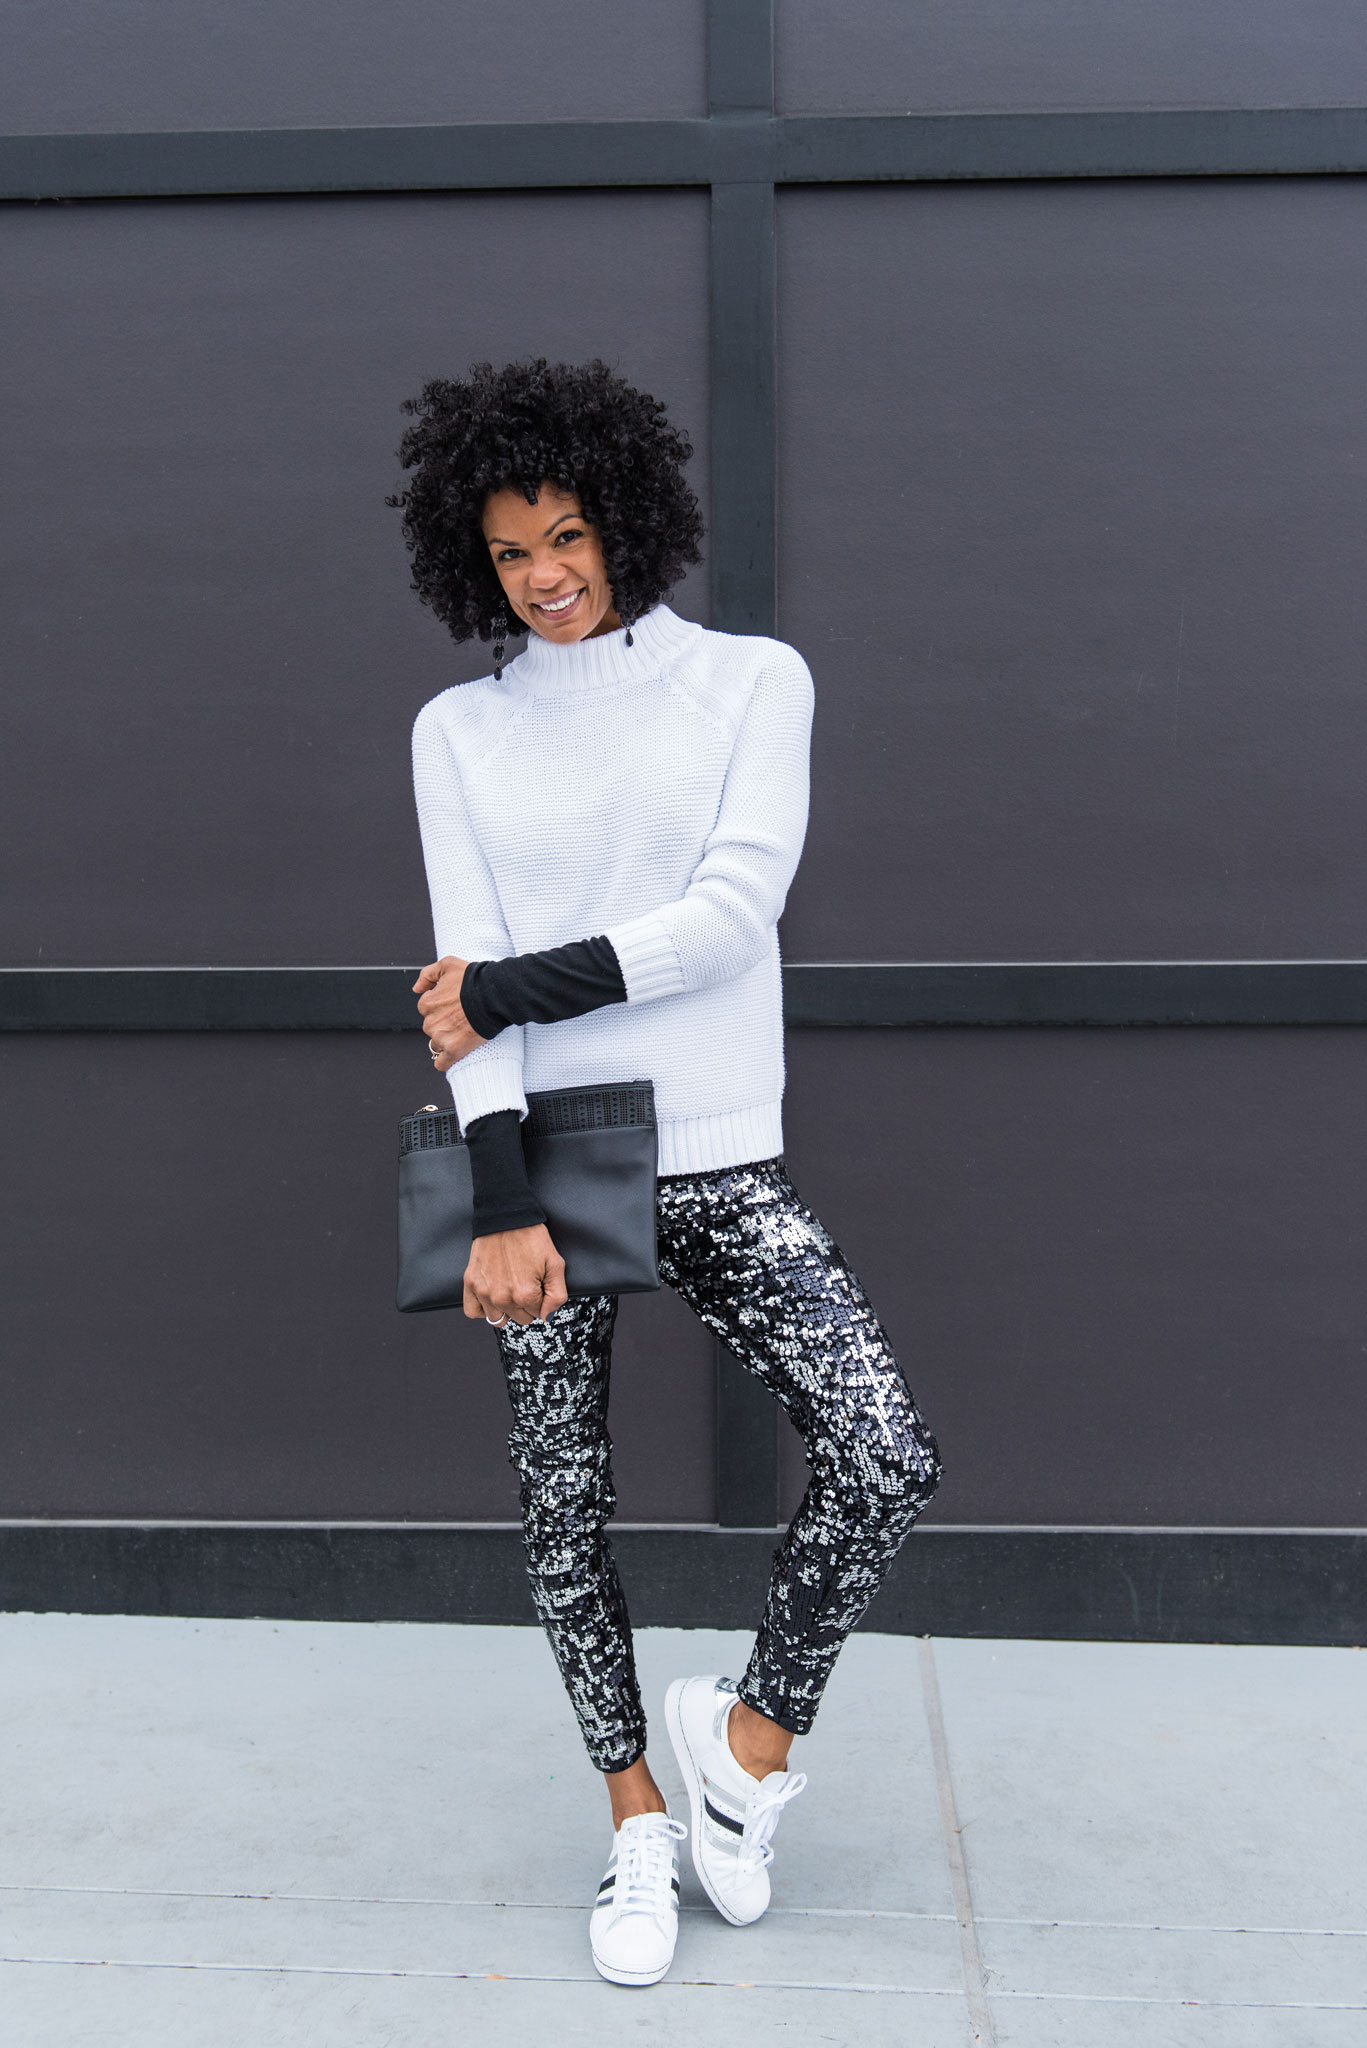 Sequin Leggings Under $100 | Holiday Party Outfits | Express Holiday | Sequins  leggings outfit, Trendy party outfits, Outfits with leggings